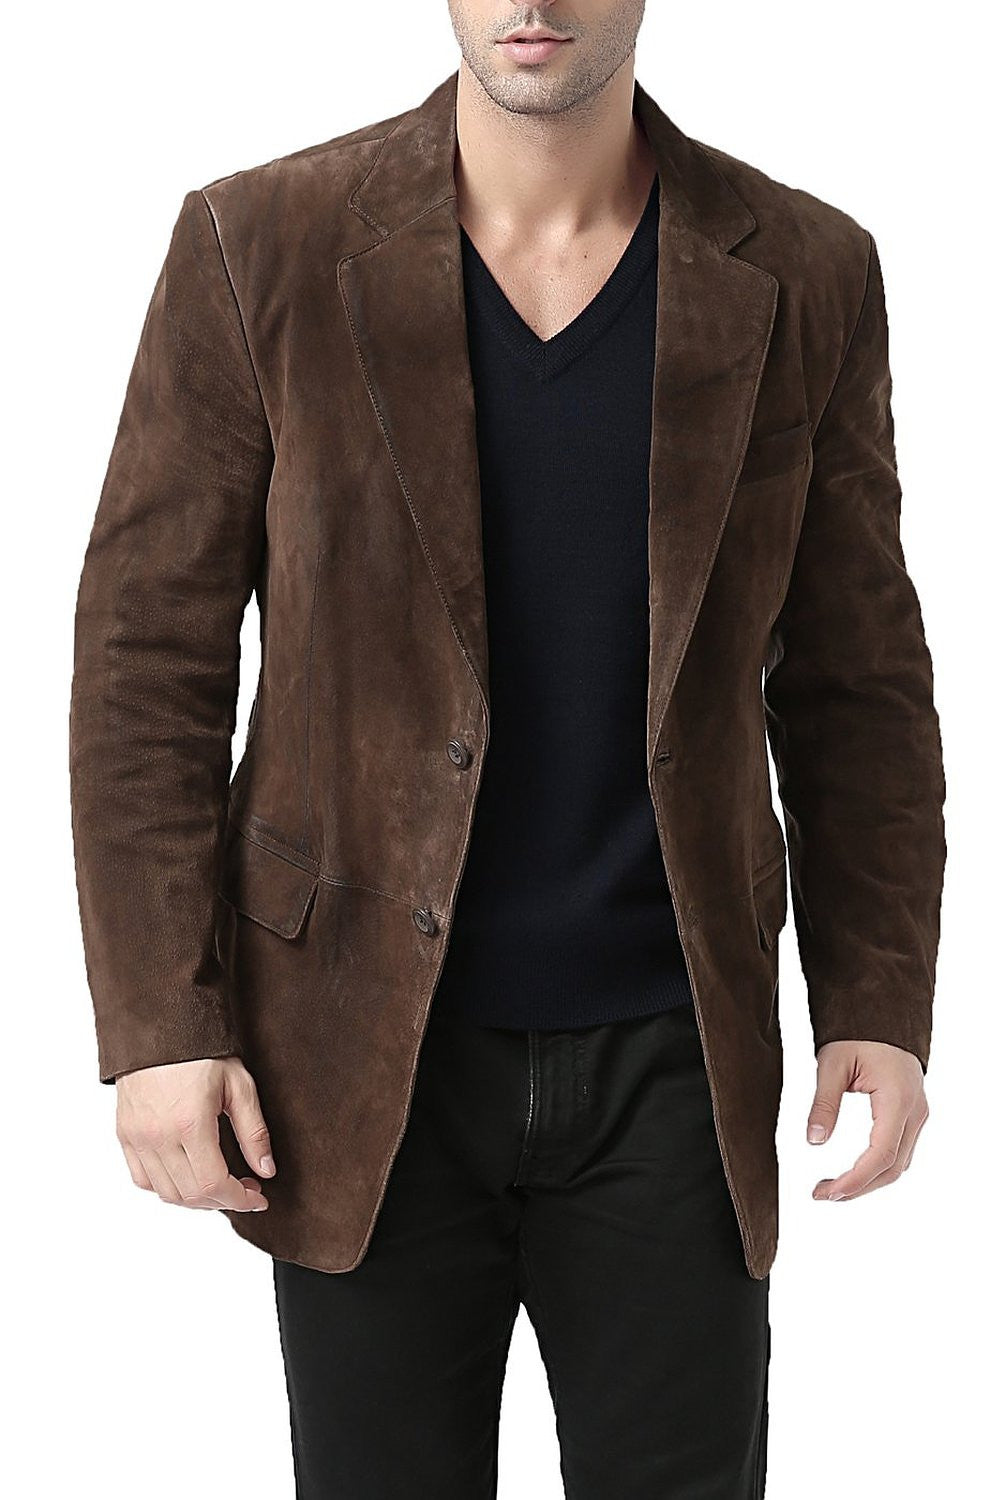 BGSD Men Cliff Classic Two-Button Suede Leather Blazer